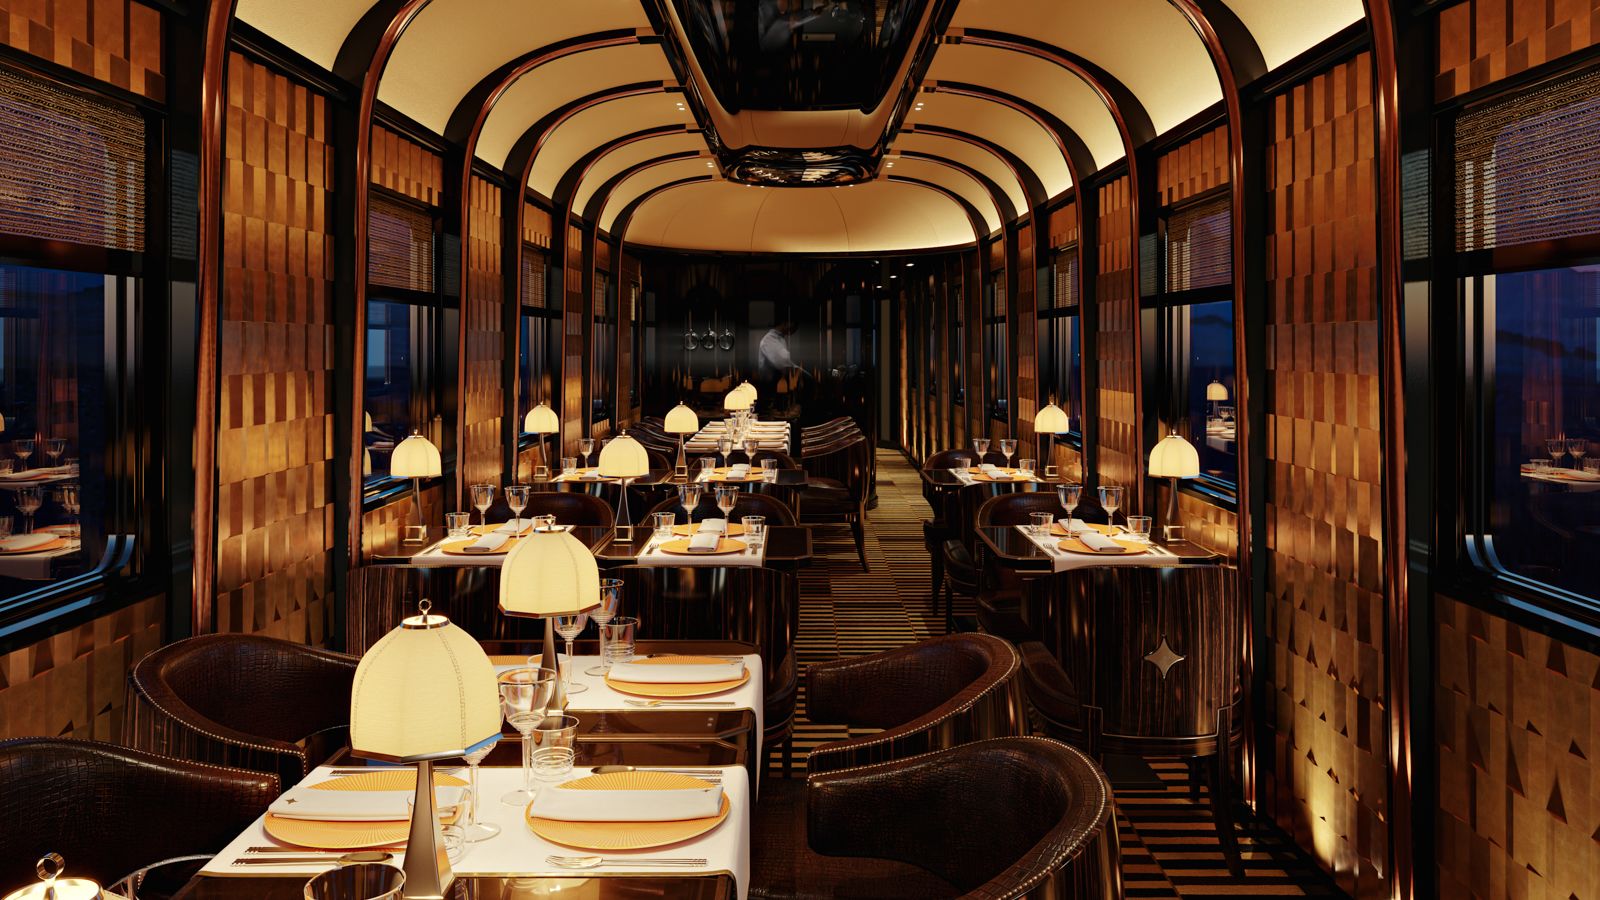 Architecture Hub - Venice Simplon-Orient-Express. Made up of original 1920s  and 30s European carriages, faithfully restored to their original elegance.  See more: themindcircle.com/venice-simplon-orient-express/